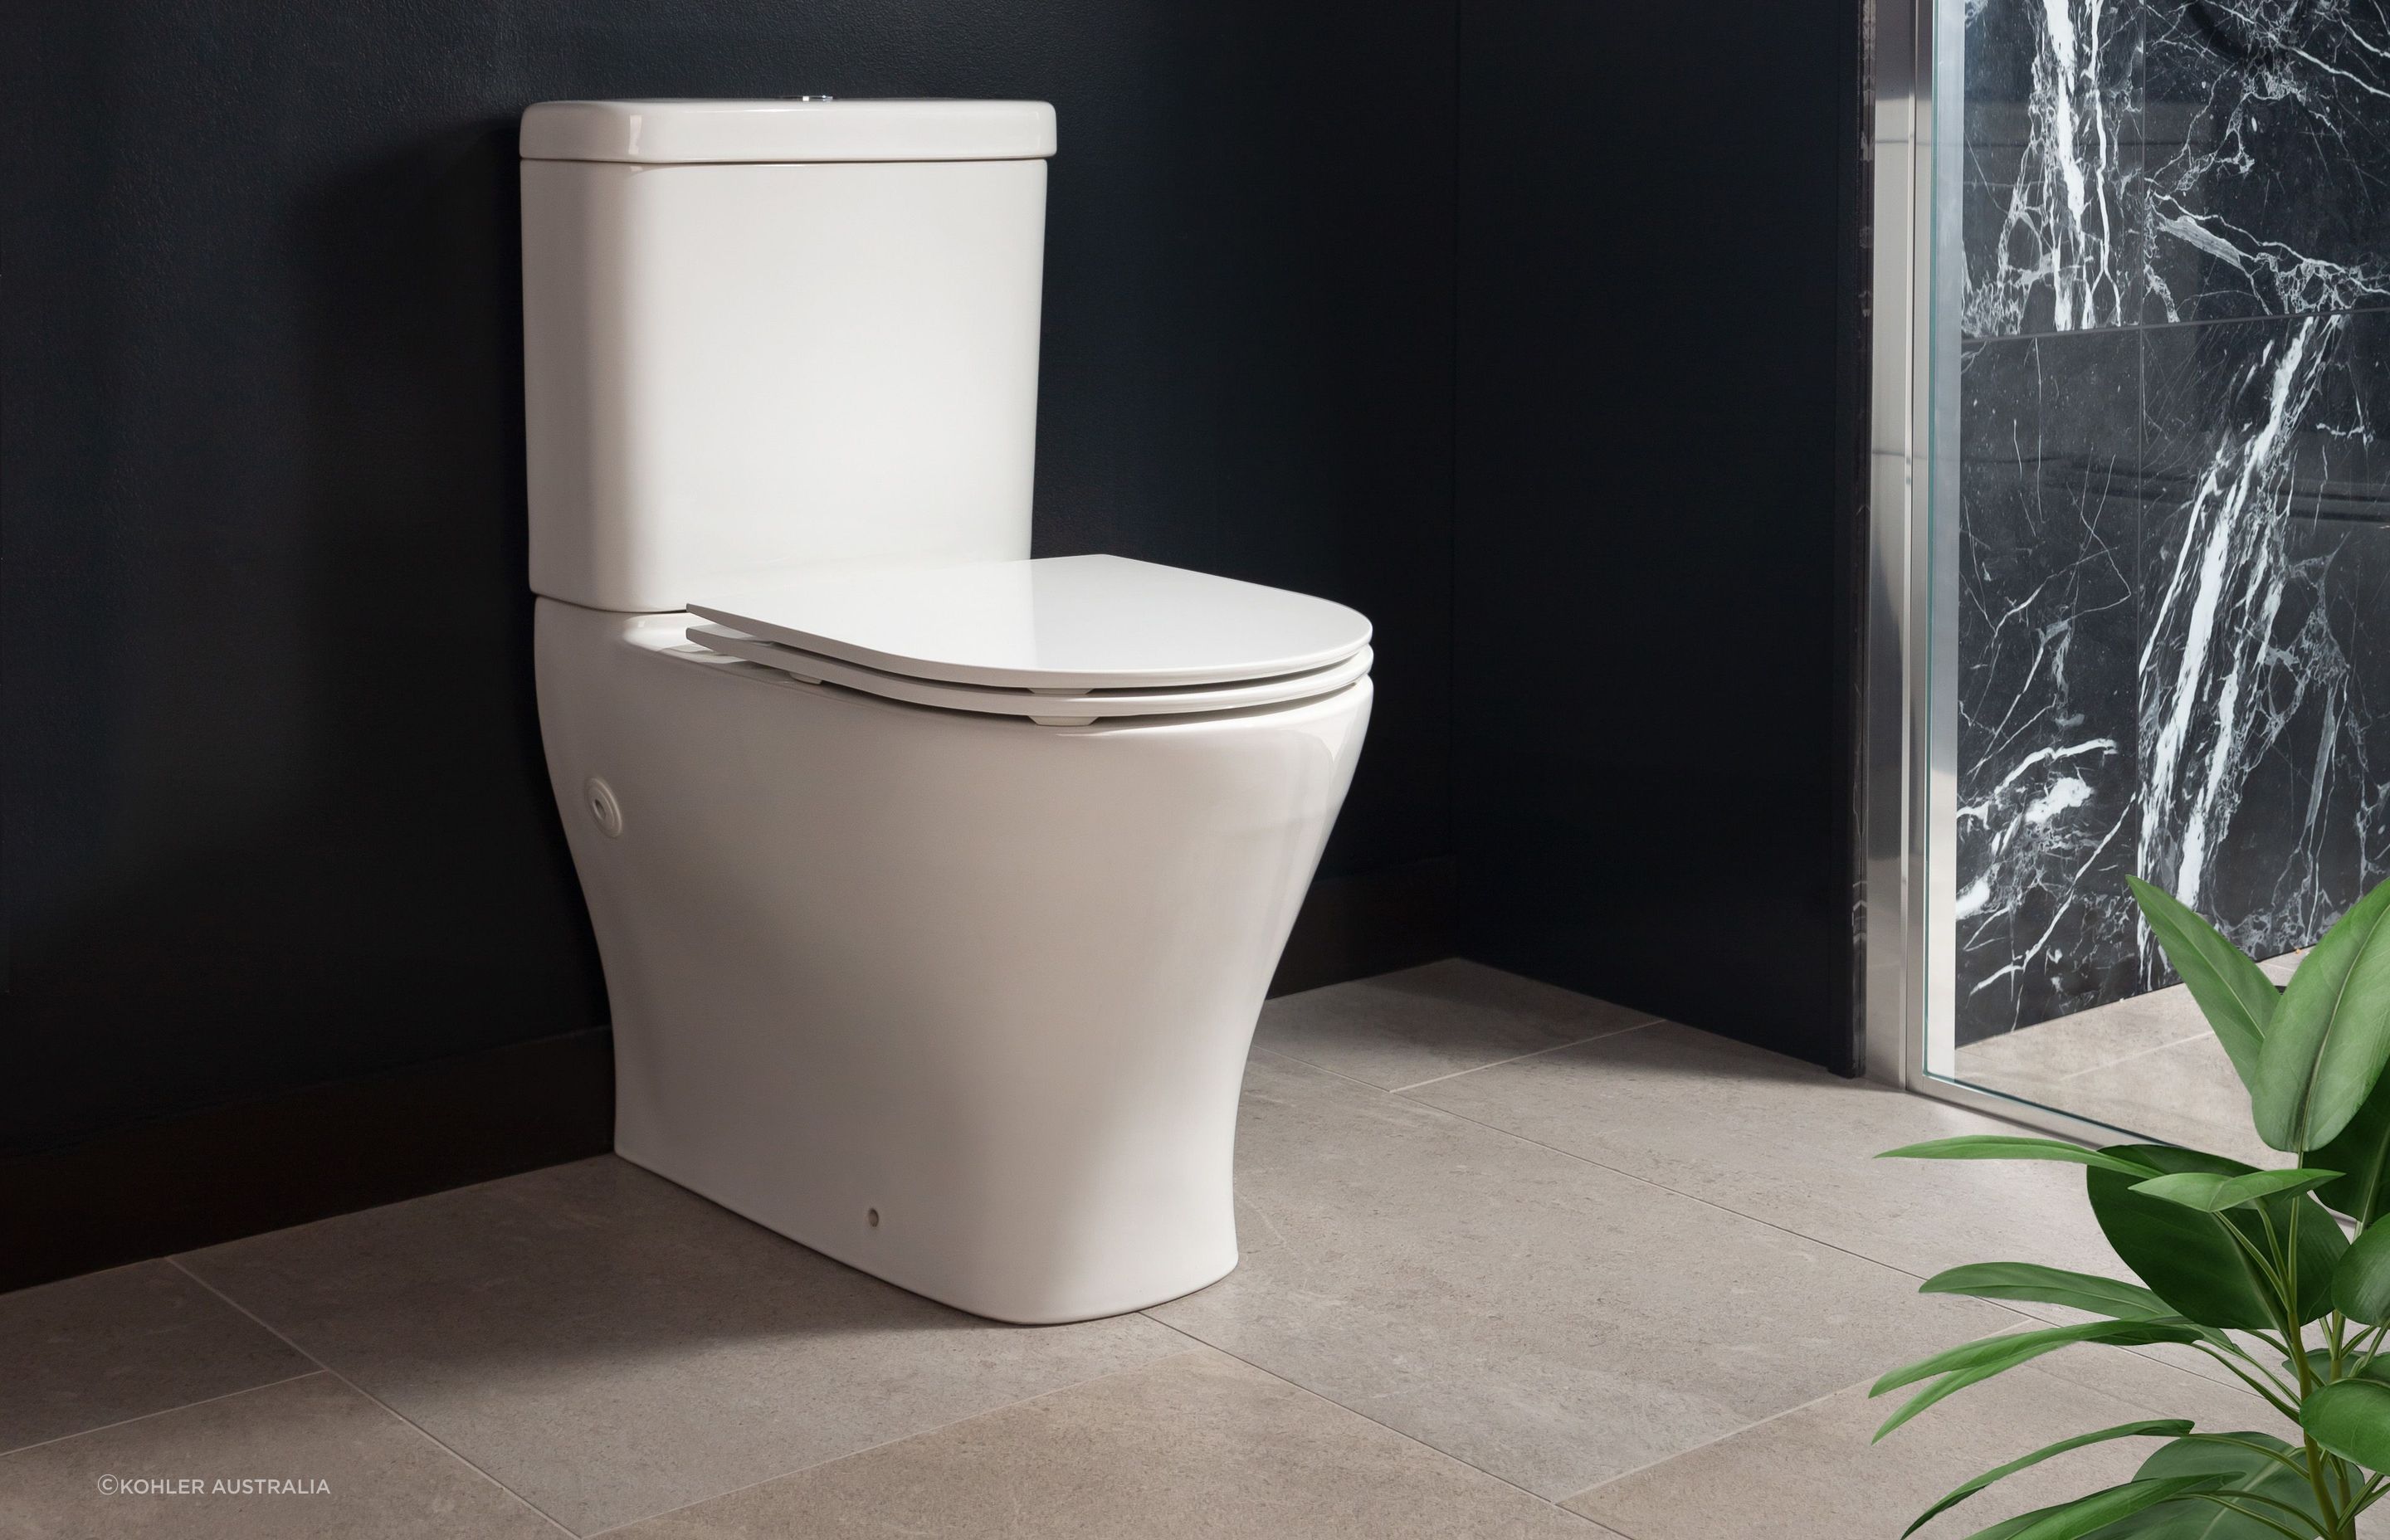 The average sized bathroom will often feature a toilet, shower, bathroom vanity and sometimes a bathtub. Featured Product: Reach II Back to Wall Toilet Suite by Kohler Australia